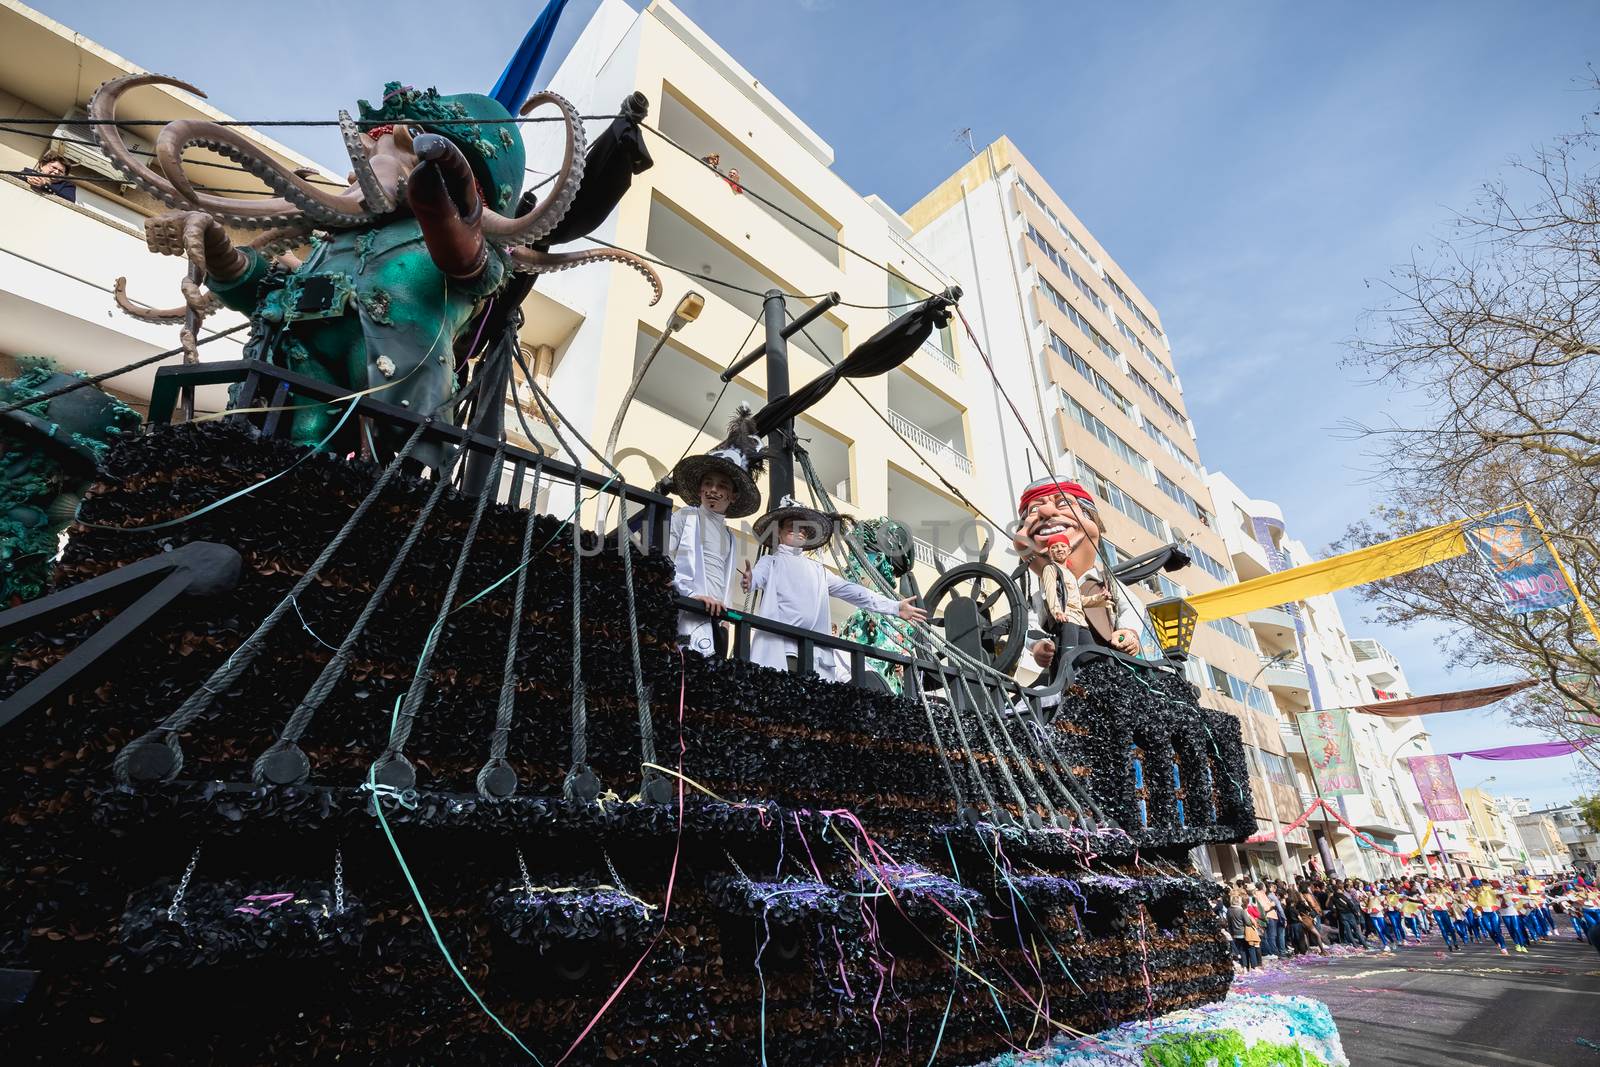 Pirate shipe loat parading in the street in carnival of Loule ci by AtlanticEUROSTOXX